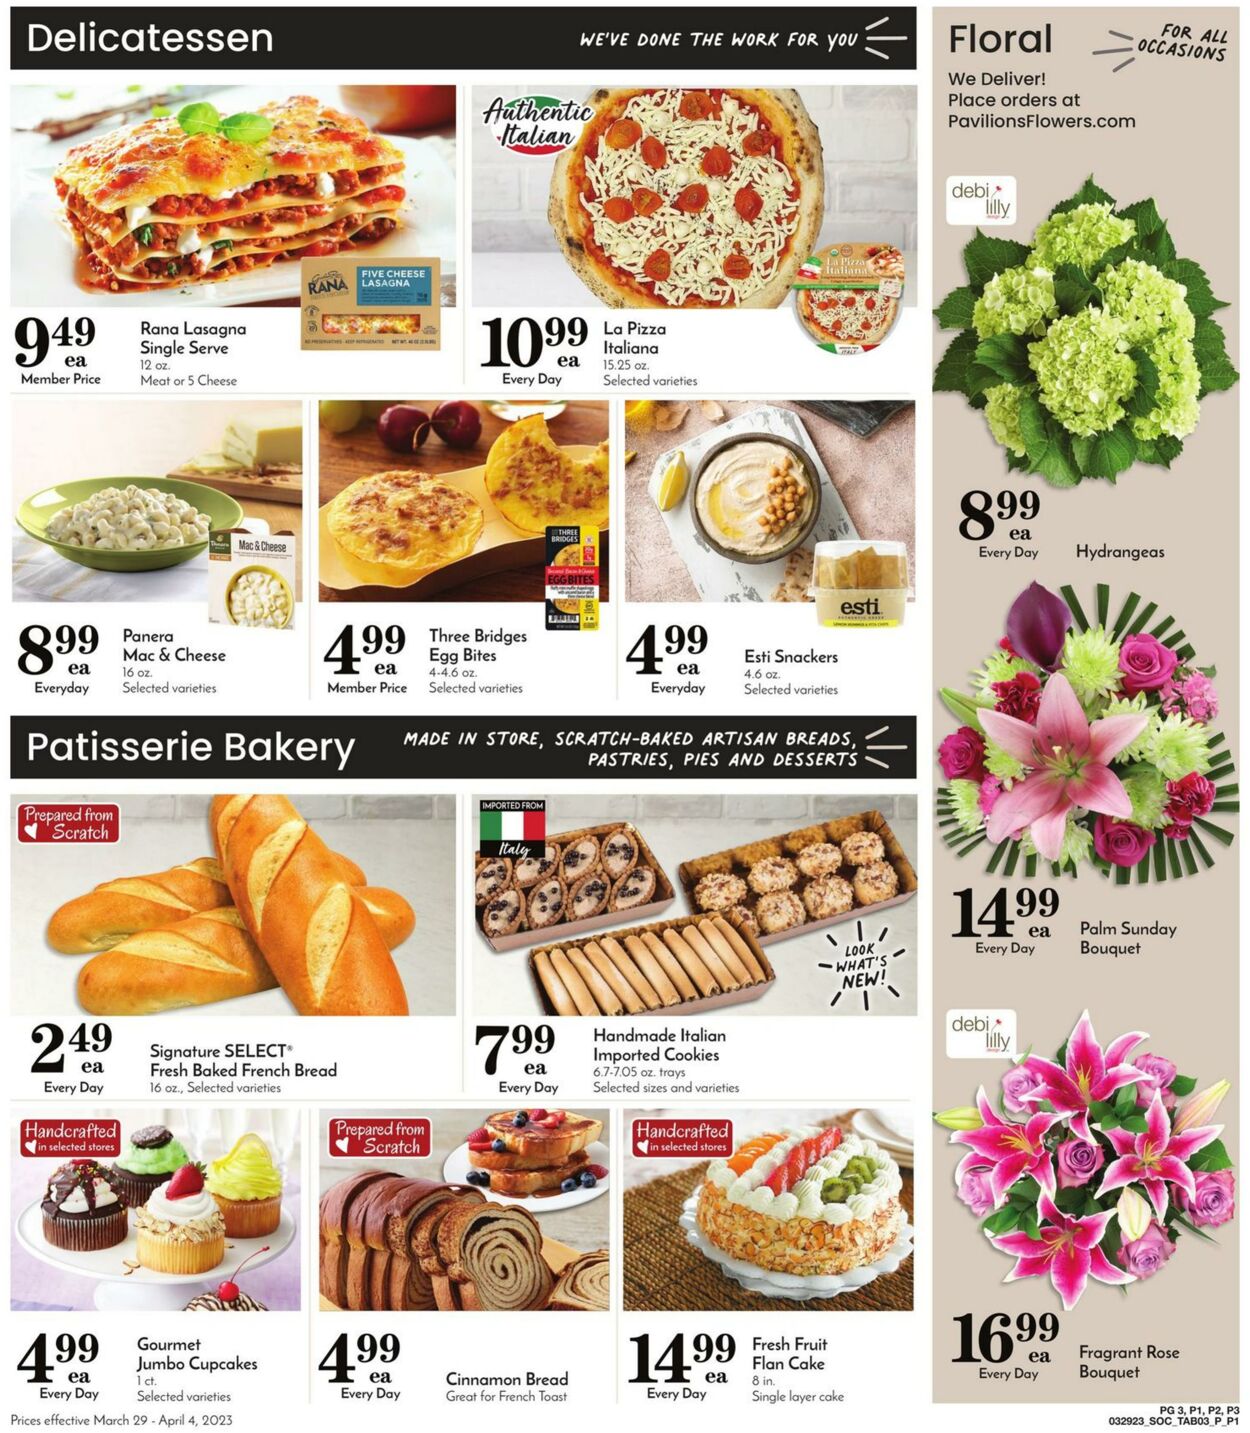 Weekly ad Pavilions 03/29/2023 - 04/04/2023